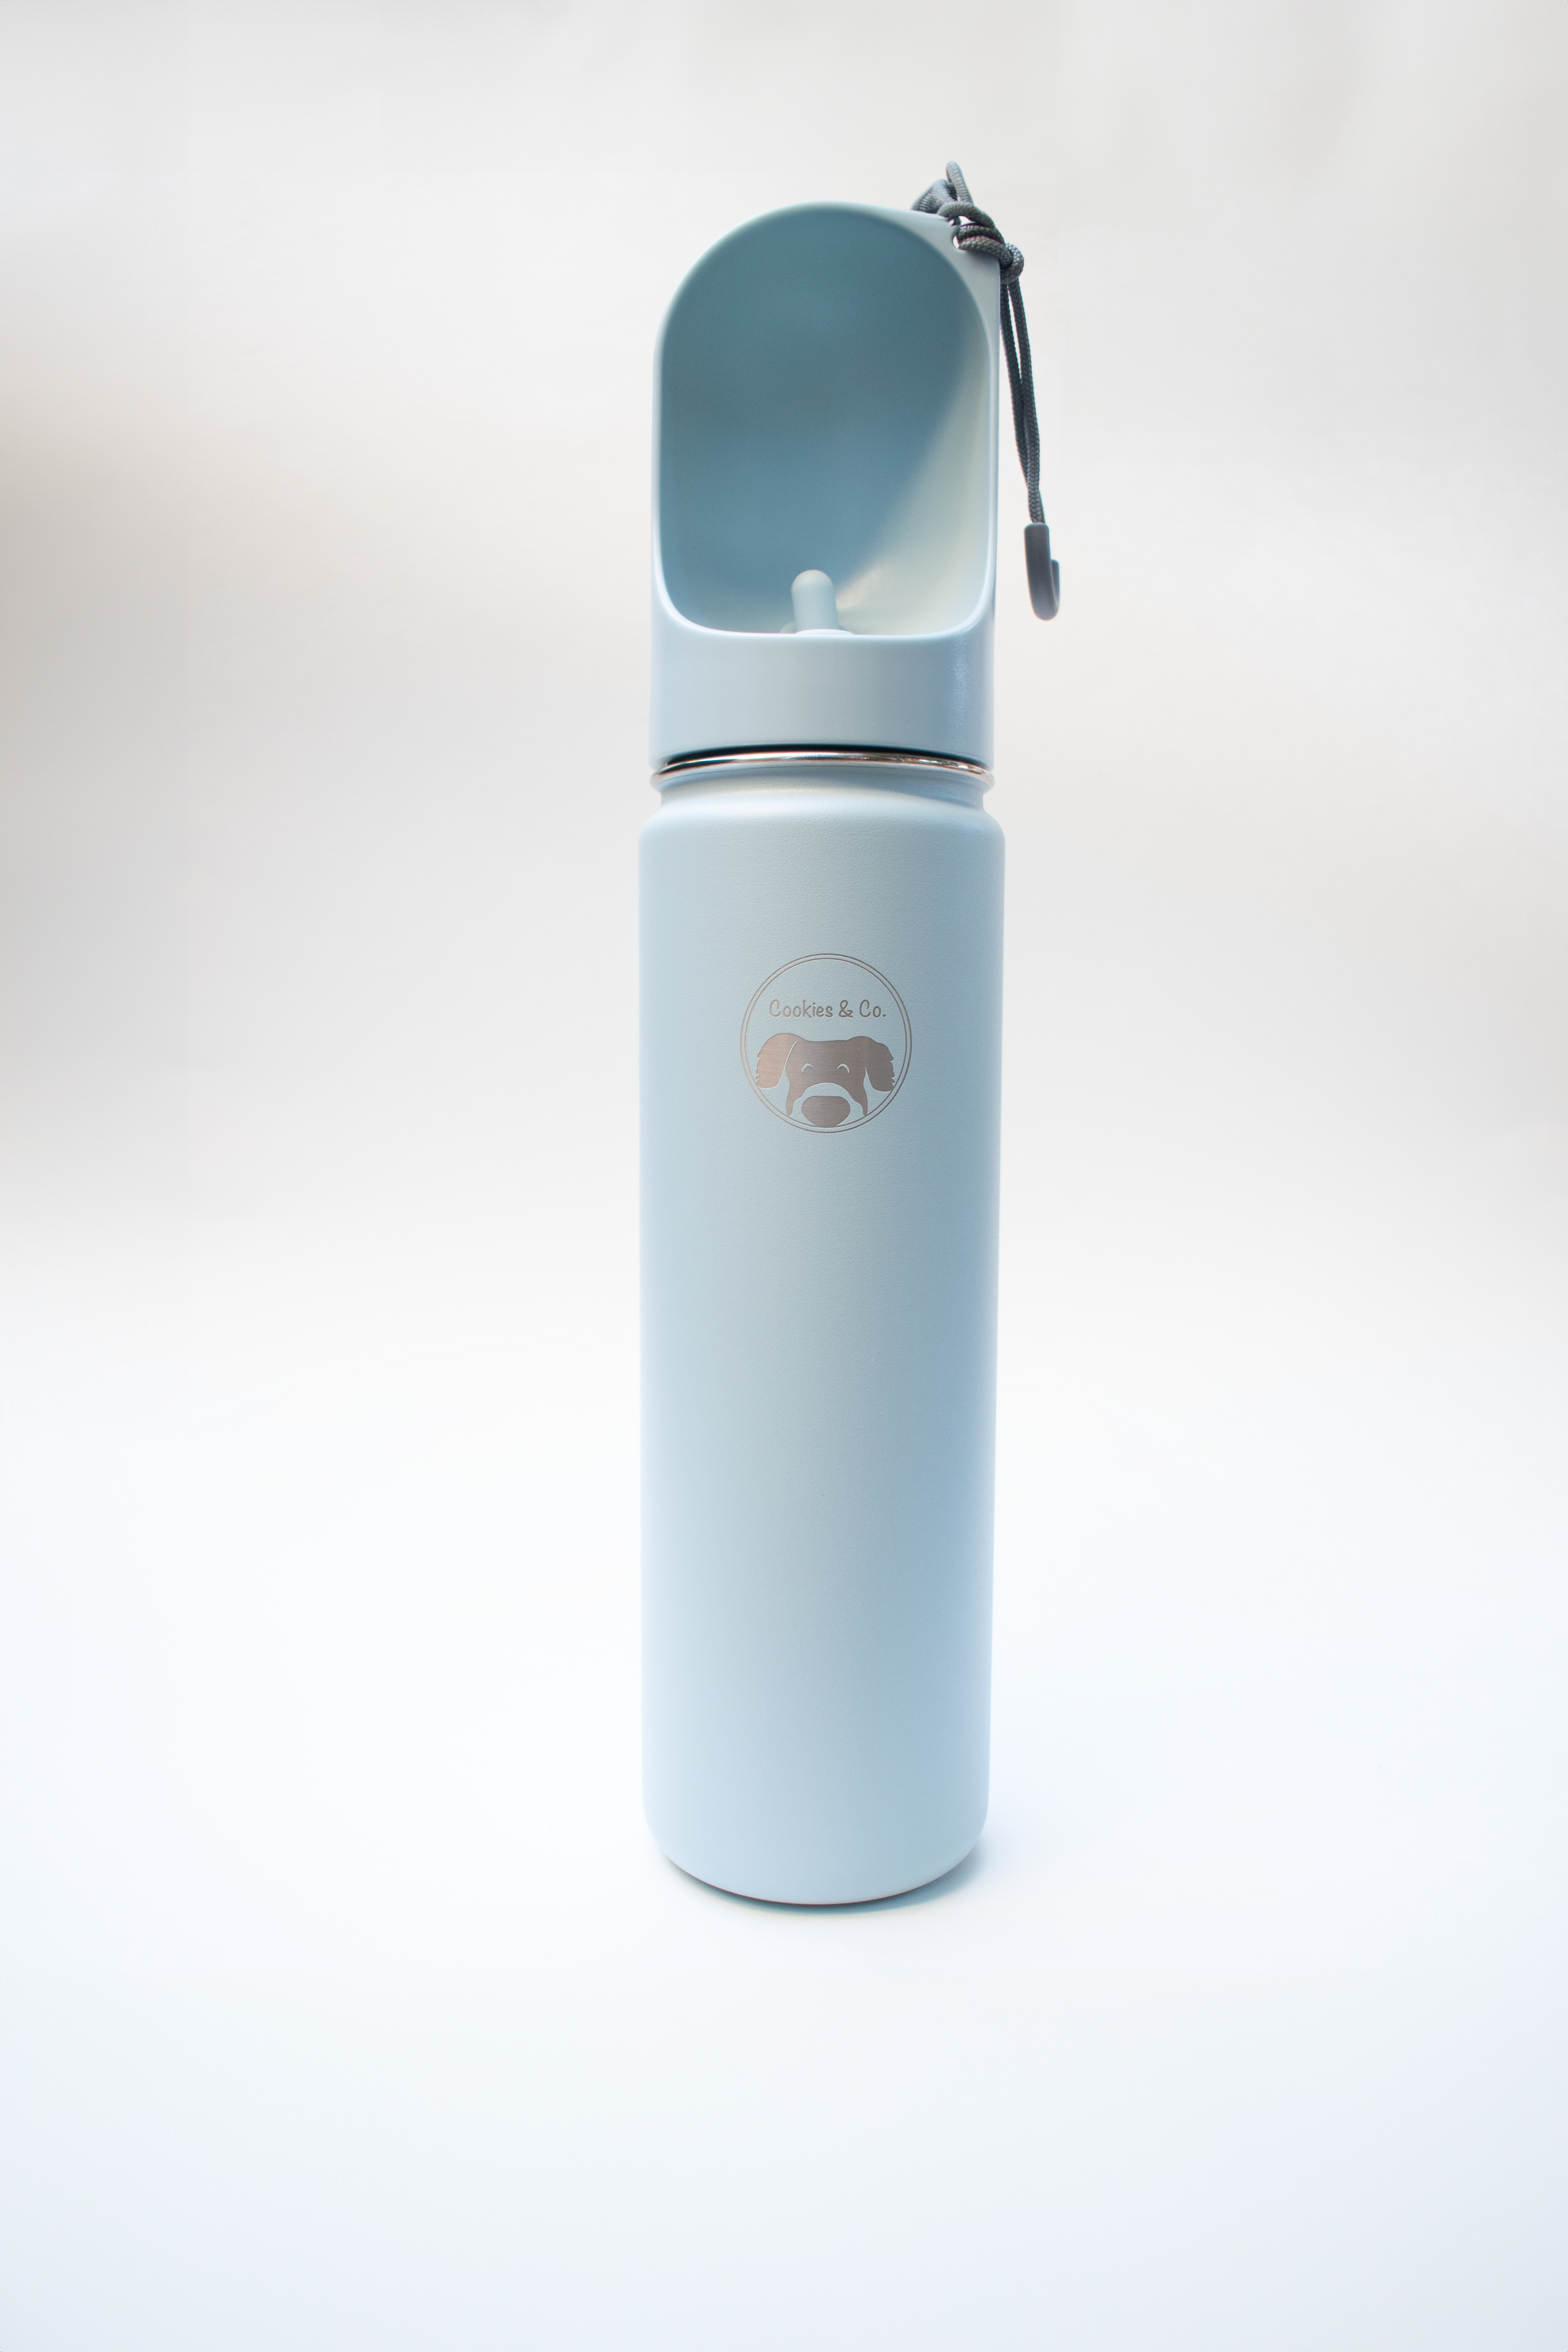 Cookies & Co.  Dog Water Bottle – The Cookies & Co.